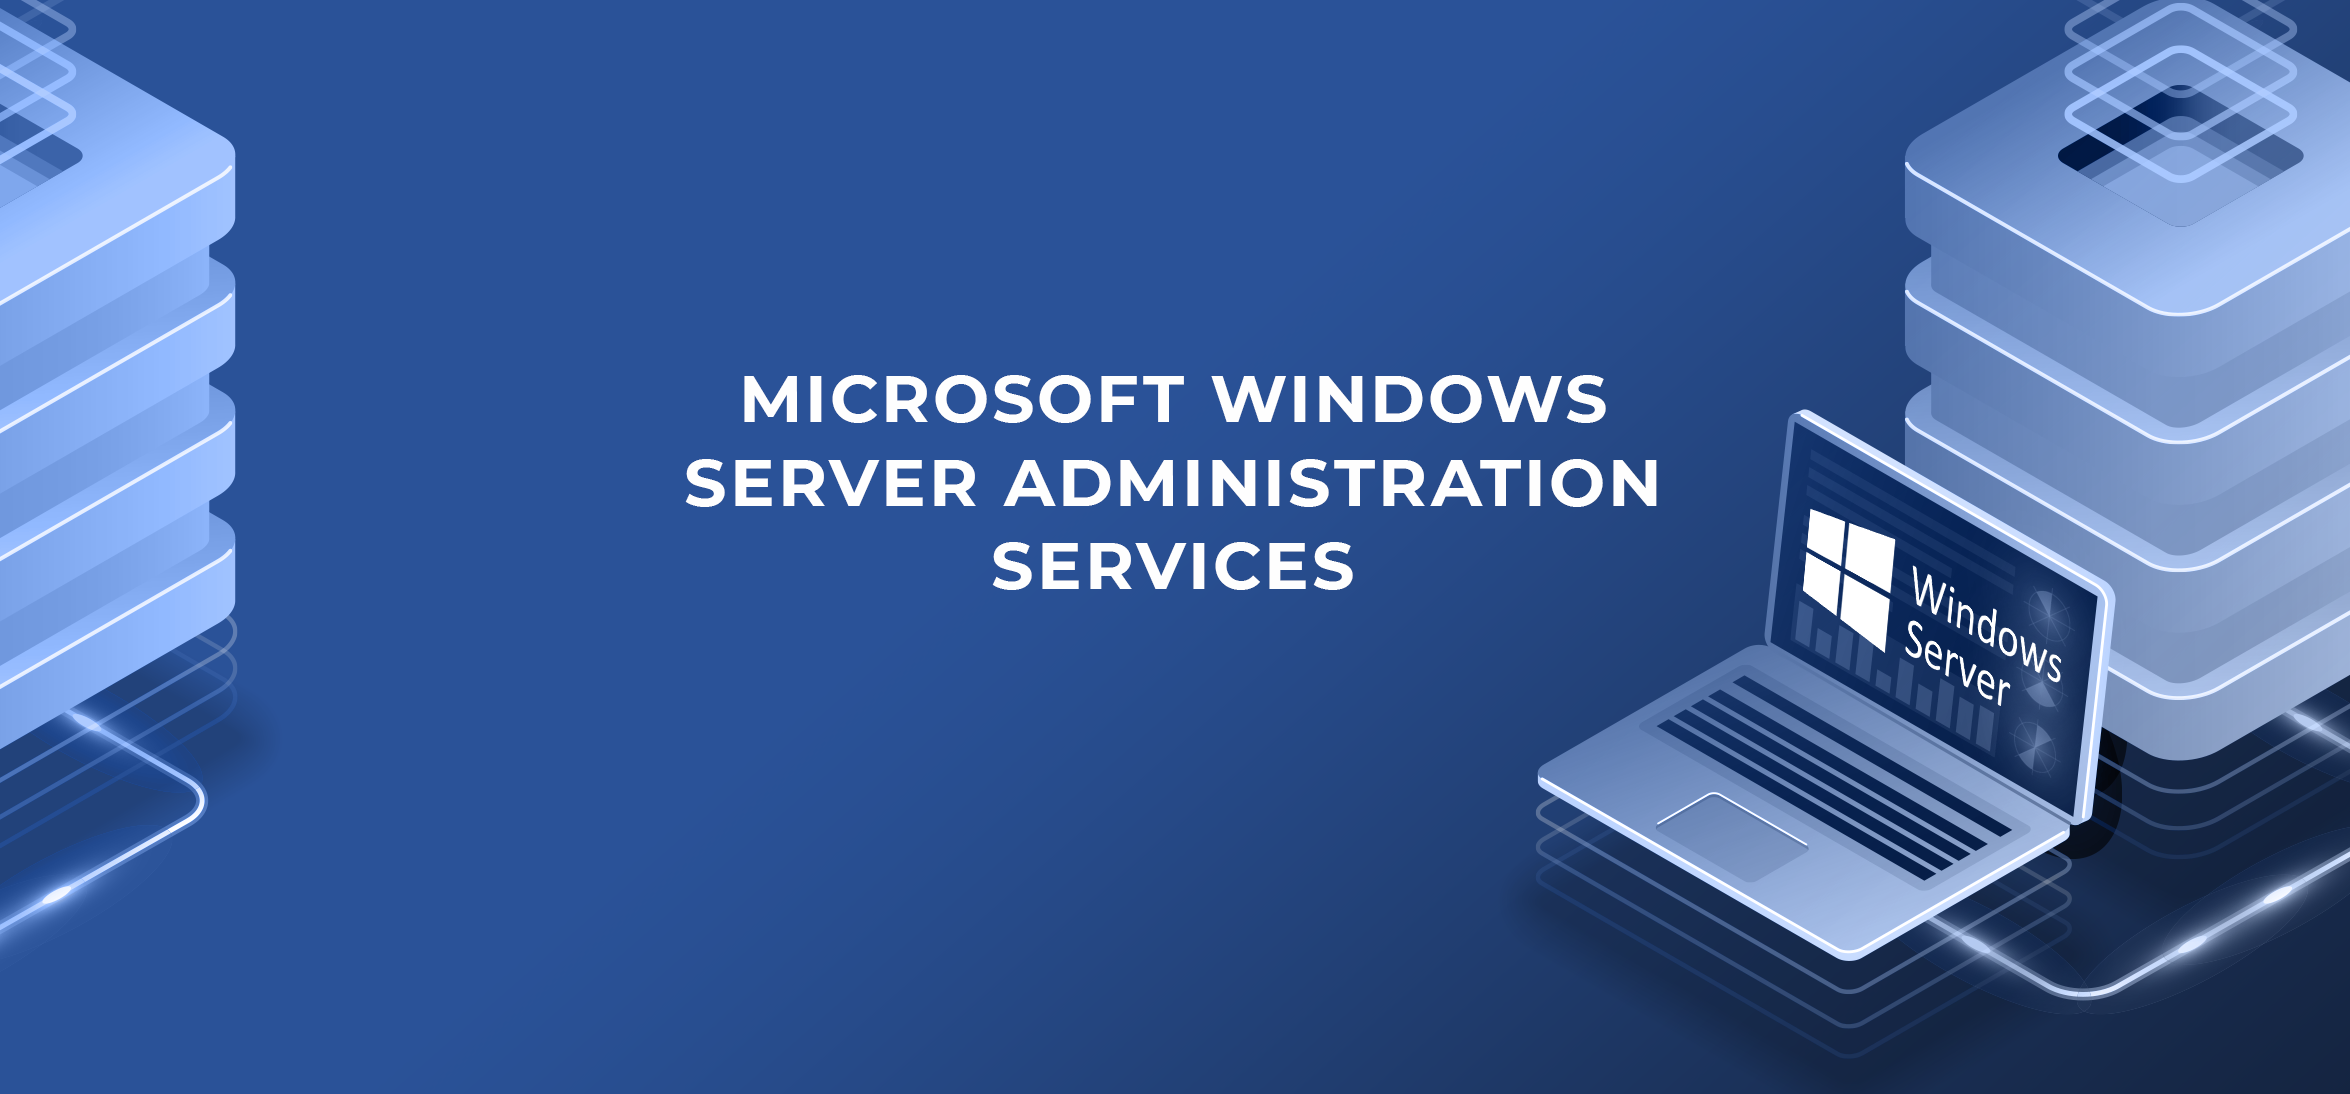 Effective Windows Server Administration and Support Solution Provider in Chula Vista CA, 91911